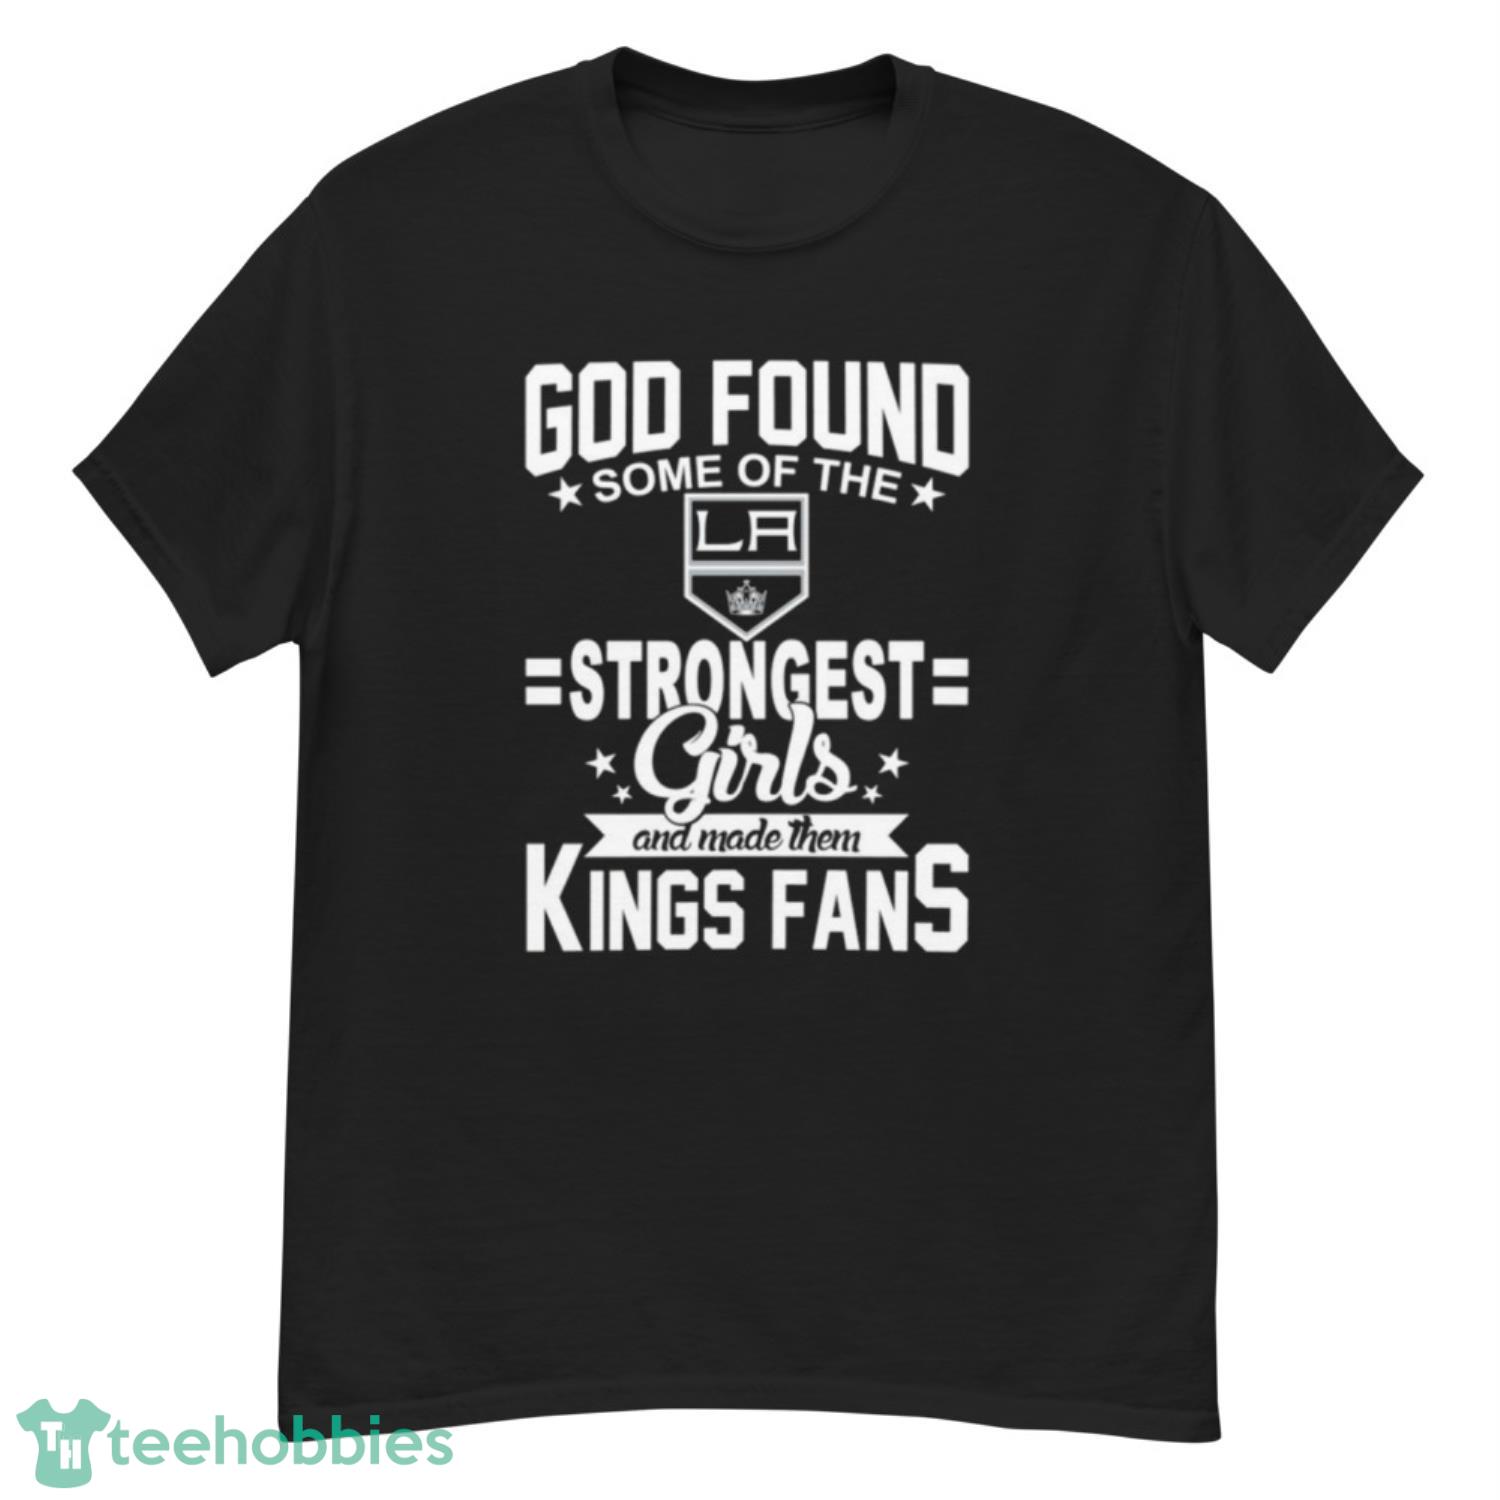 Los Angeles Kings NHL Football God Found Some Of The Strongest Girls Adoring Fans T Shirt - G500 Men’s Classic T-Shirt